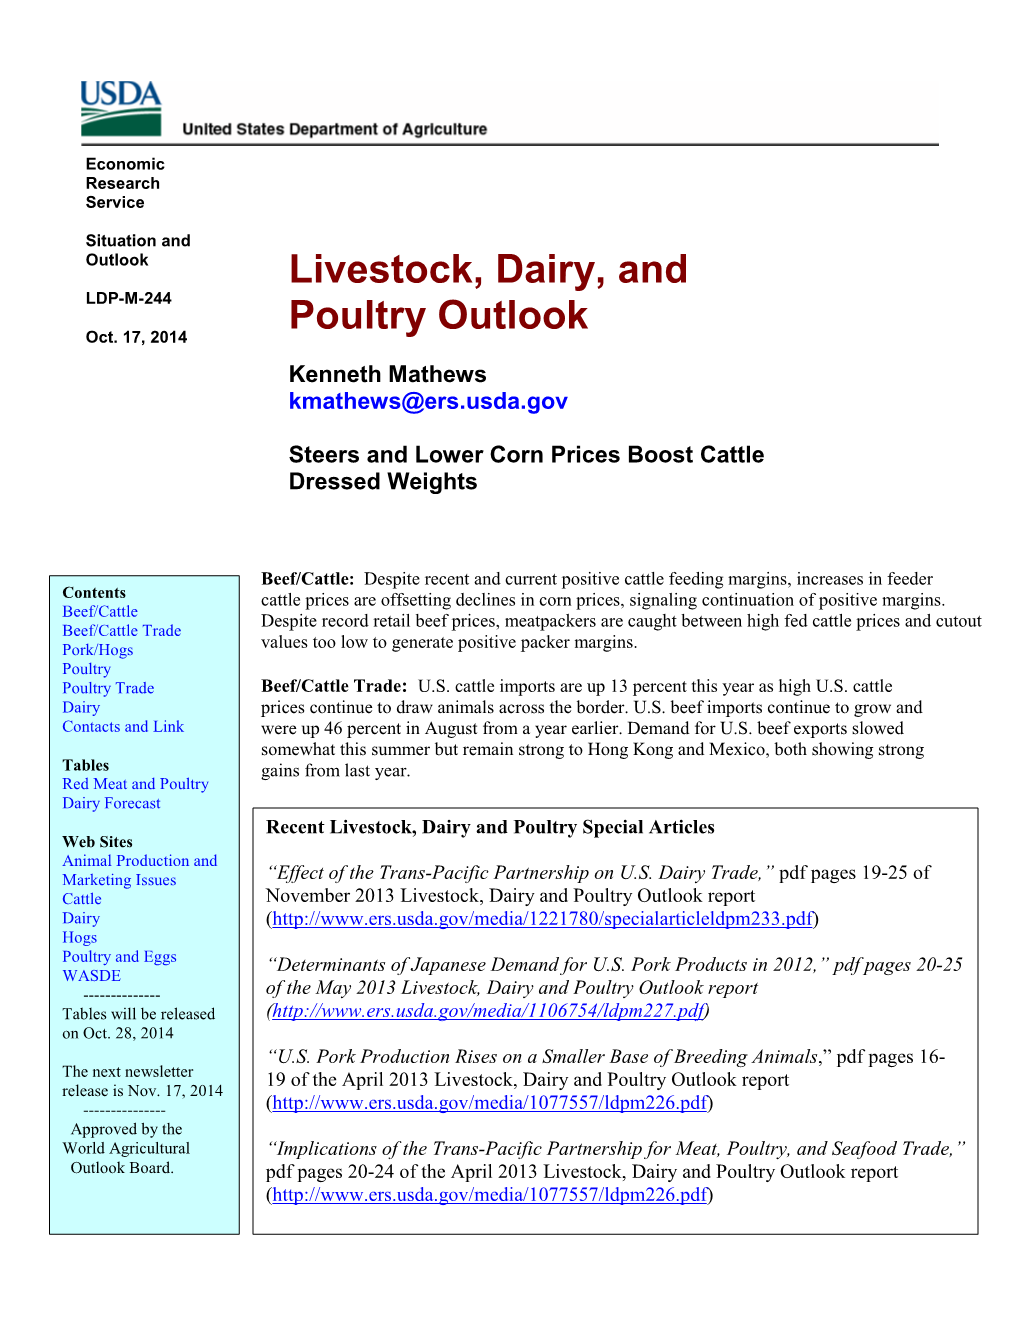 Livestock, Dairy, and Poultry Outlook/LDP-M-244/Oct